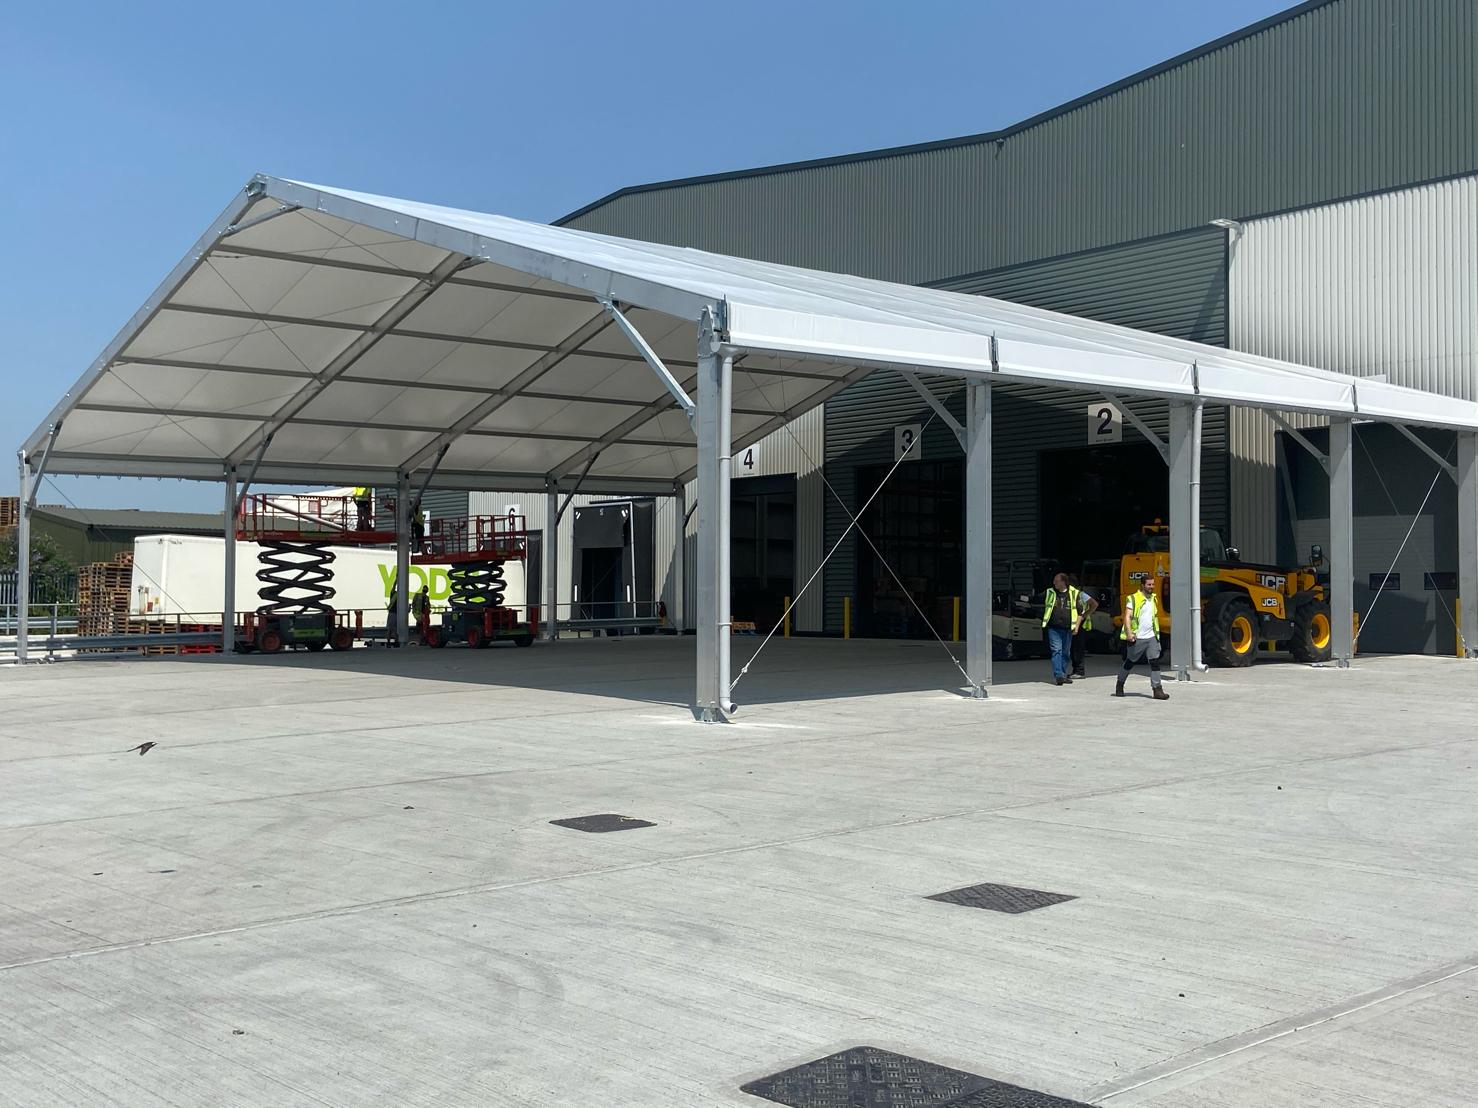 Lauralu temporary building structures and industrial canopies